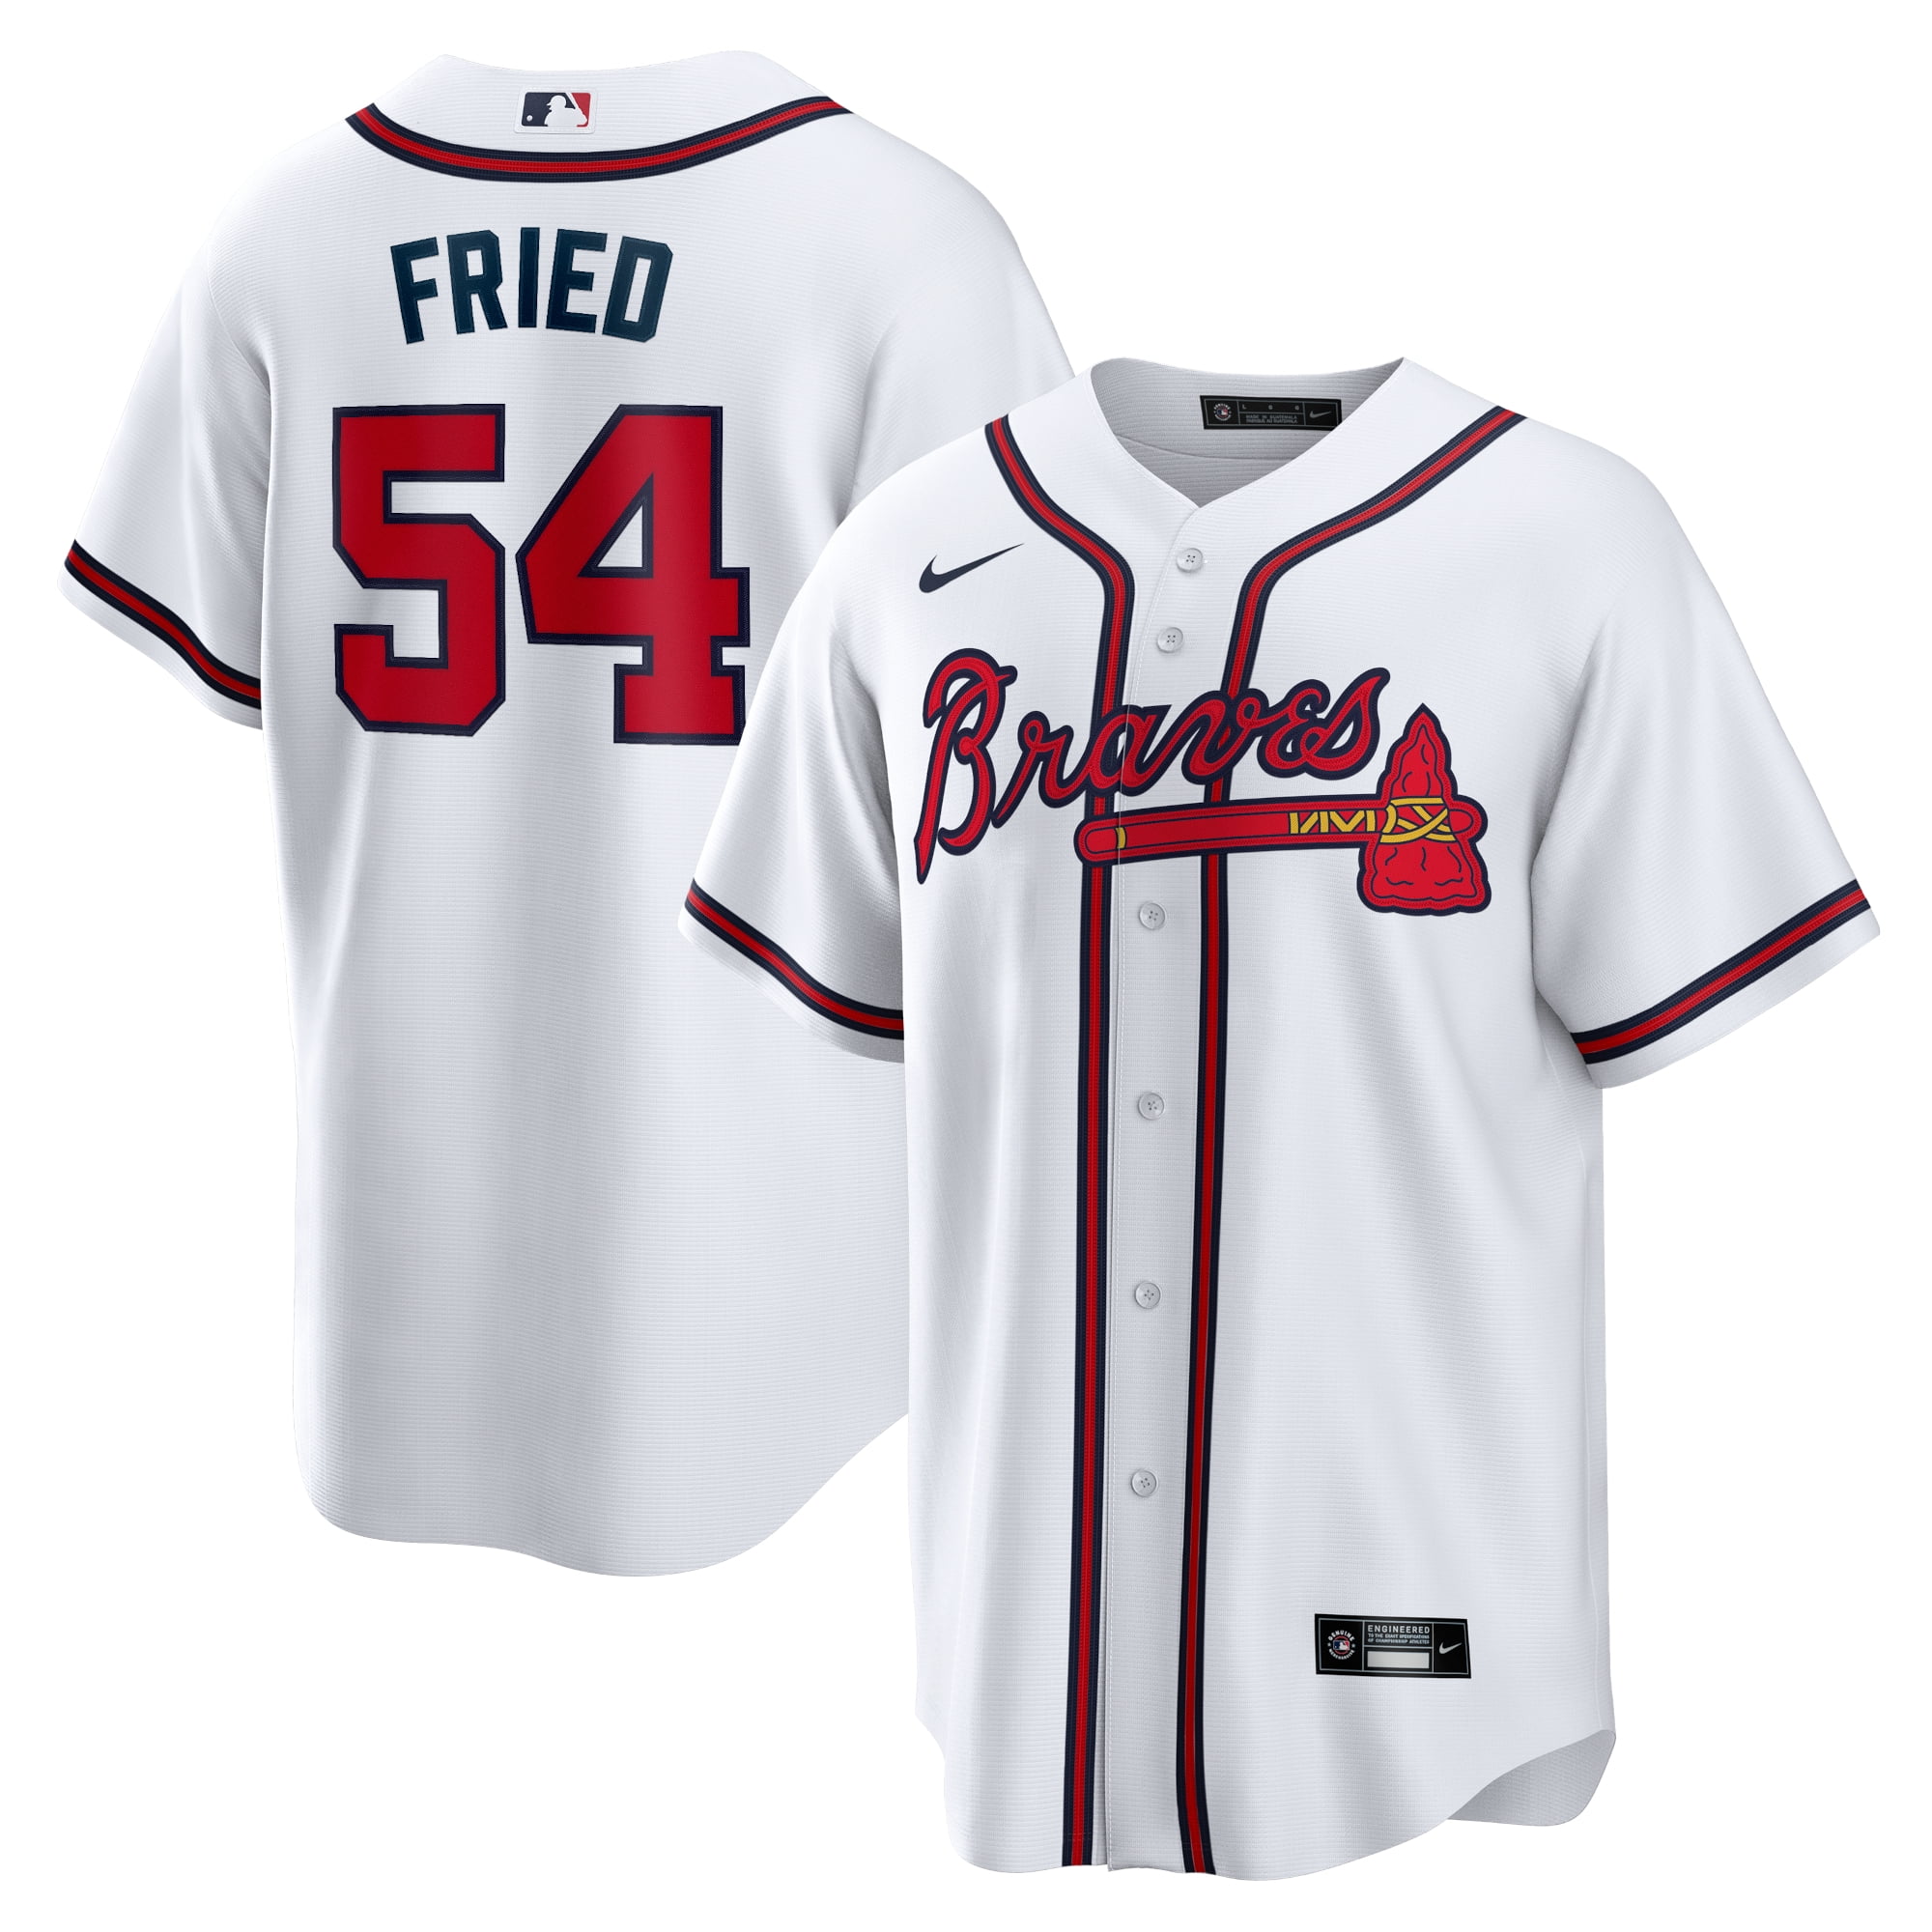 Framed Max Fried Atlanta Braves Autographed White Nike Authentic Jersey